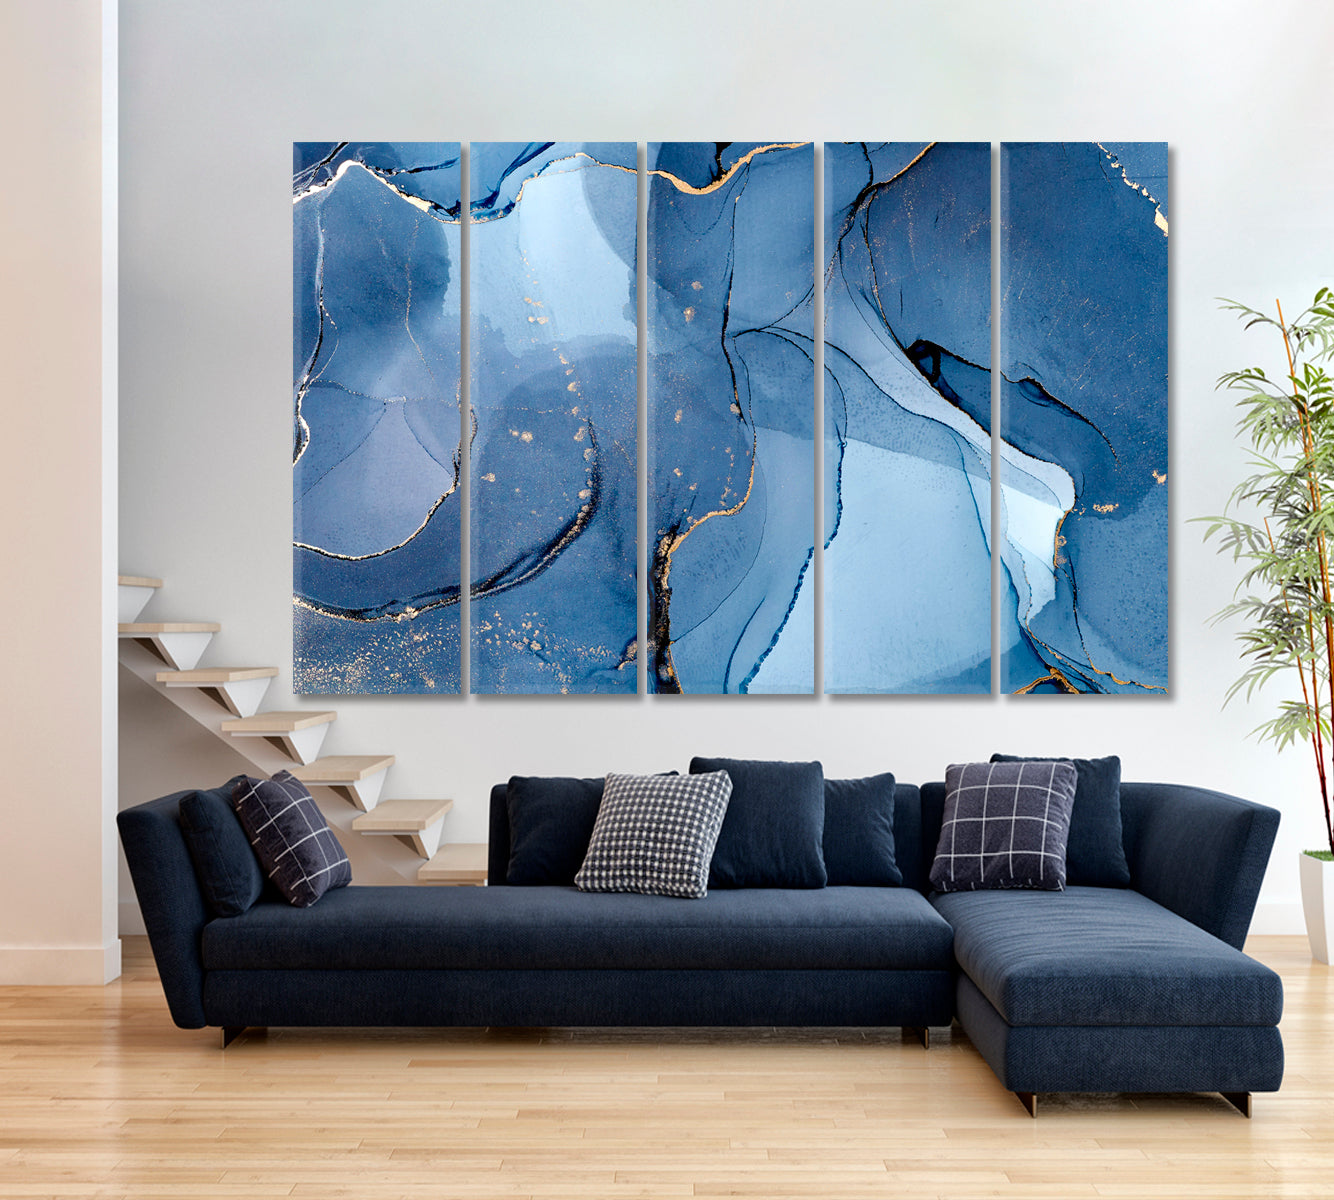 SHADES OF BLUE Marble Ink Color Pattern Creation Fluid Art, Oriental Marbling Canvas Print Artesty 5 panels 36" x 24" 